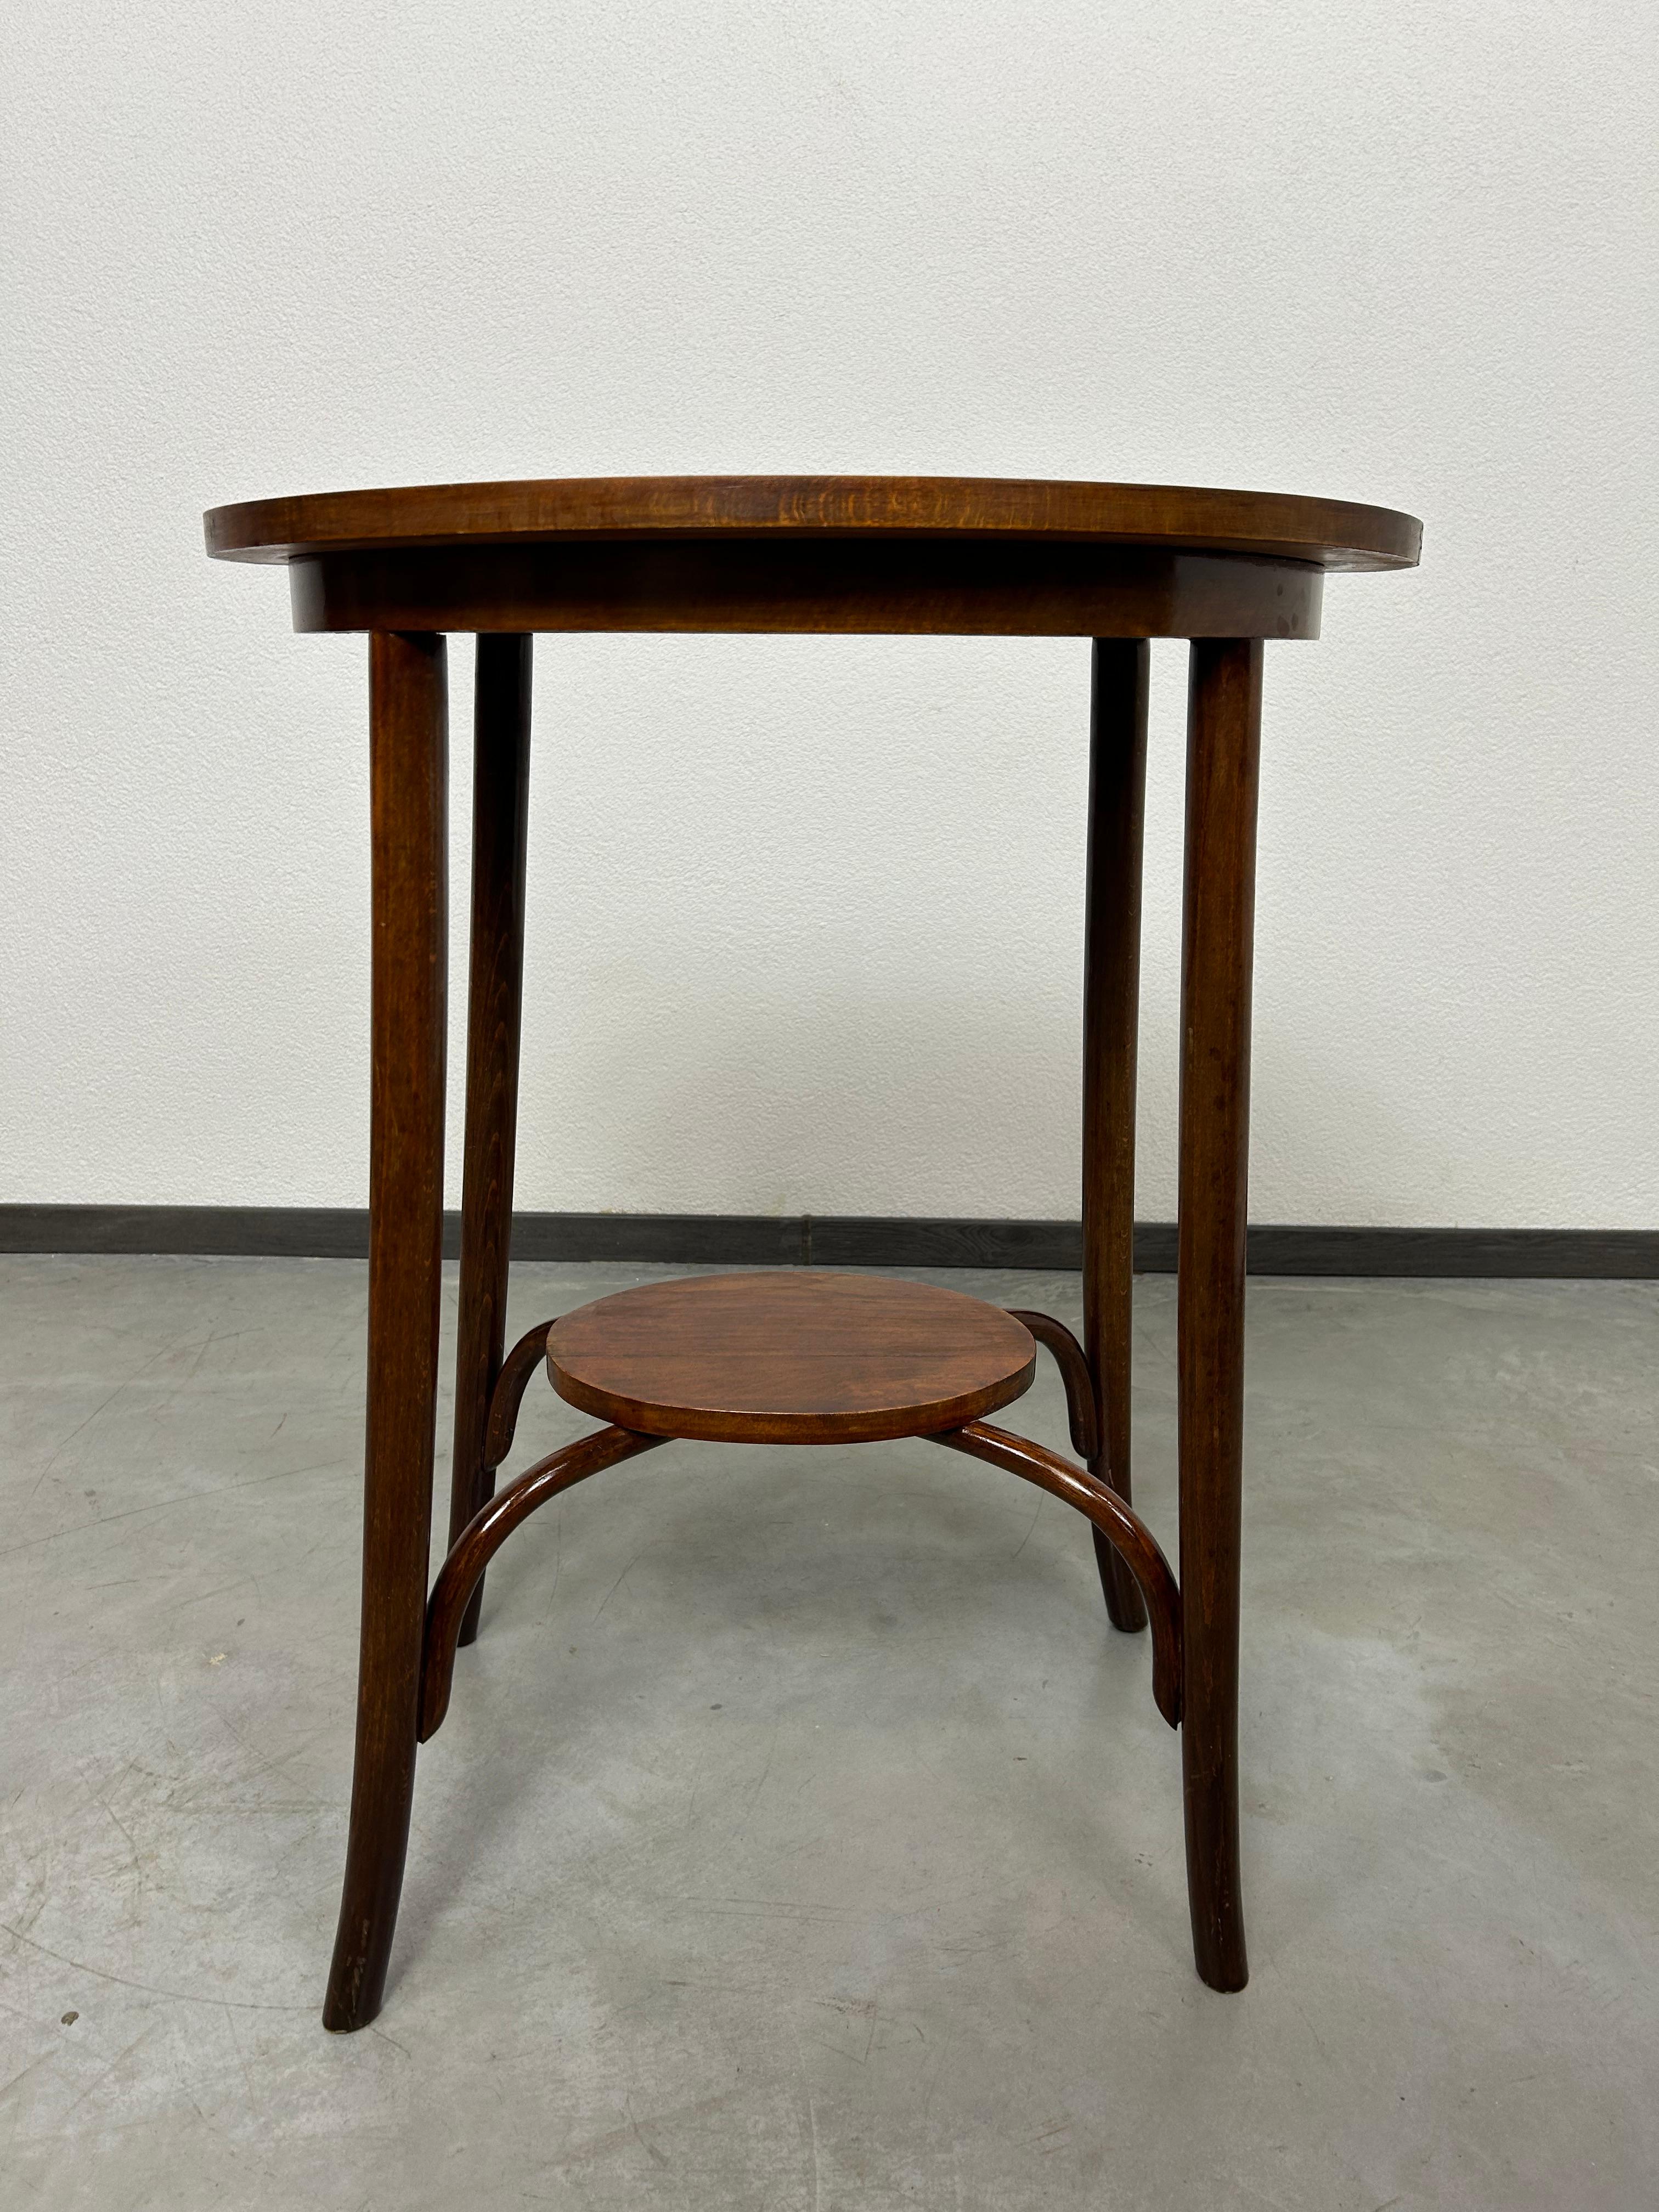 Oval bentwood table by Thonet in very good original condition.